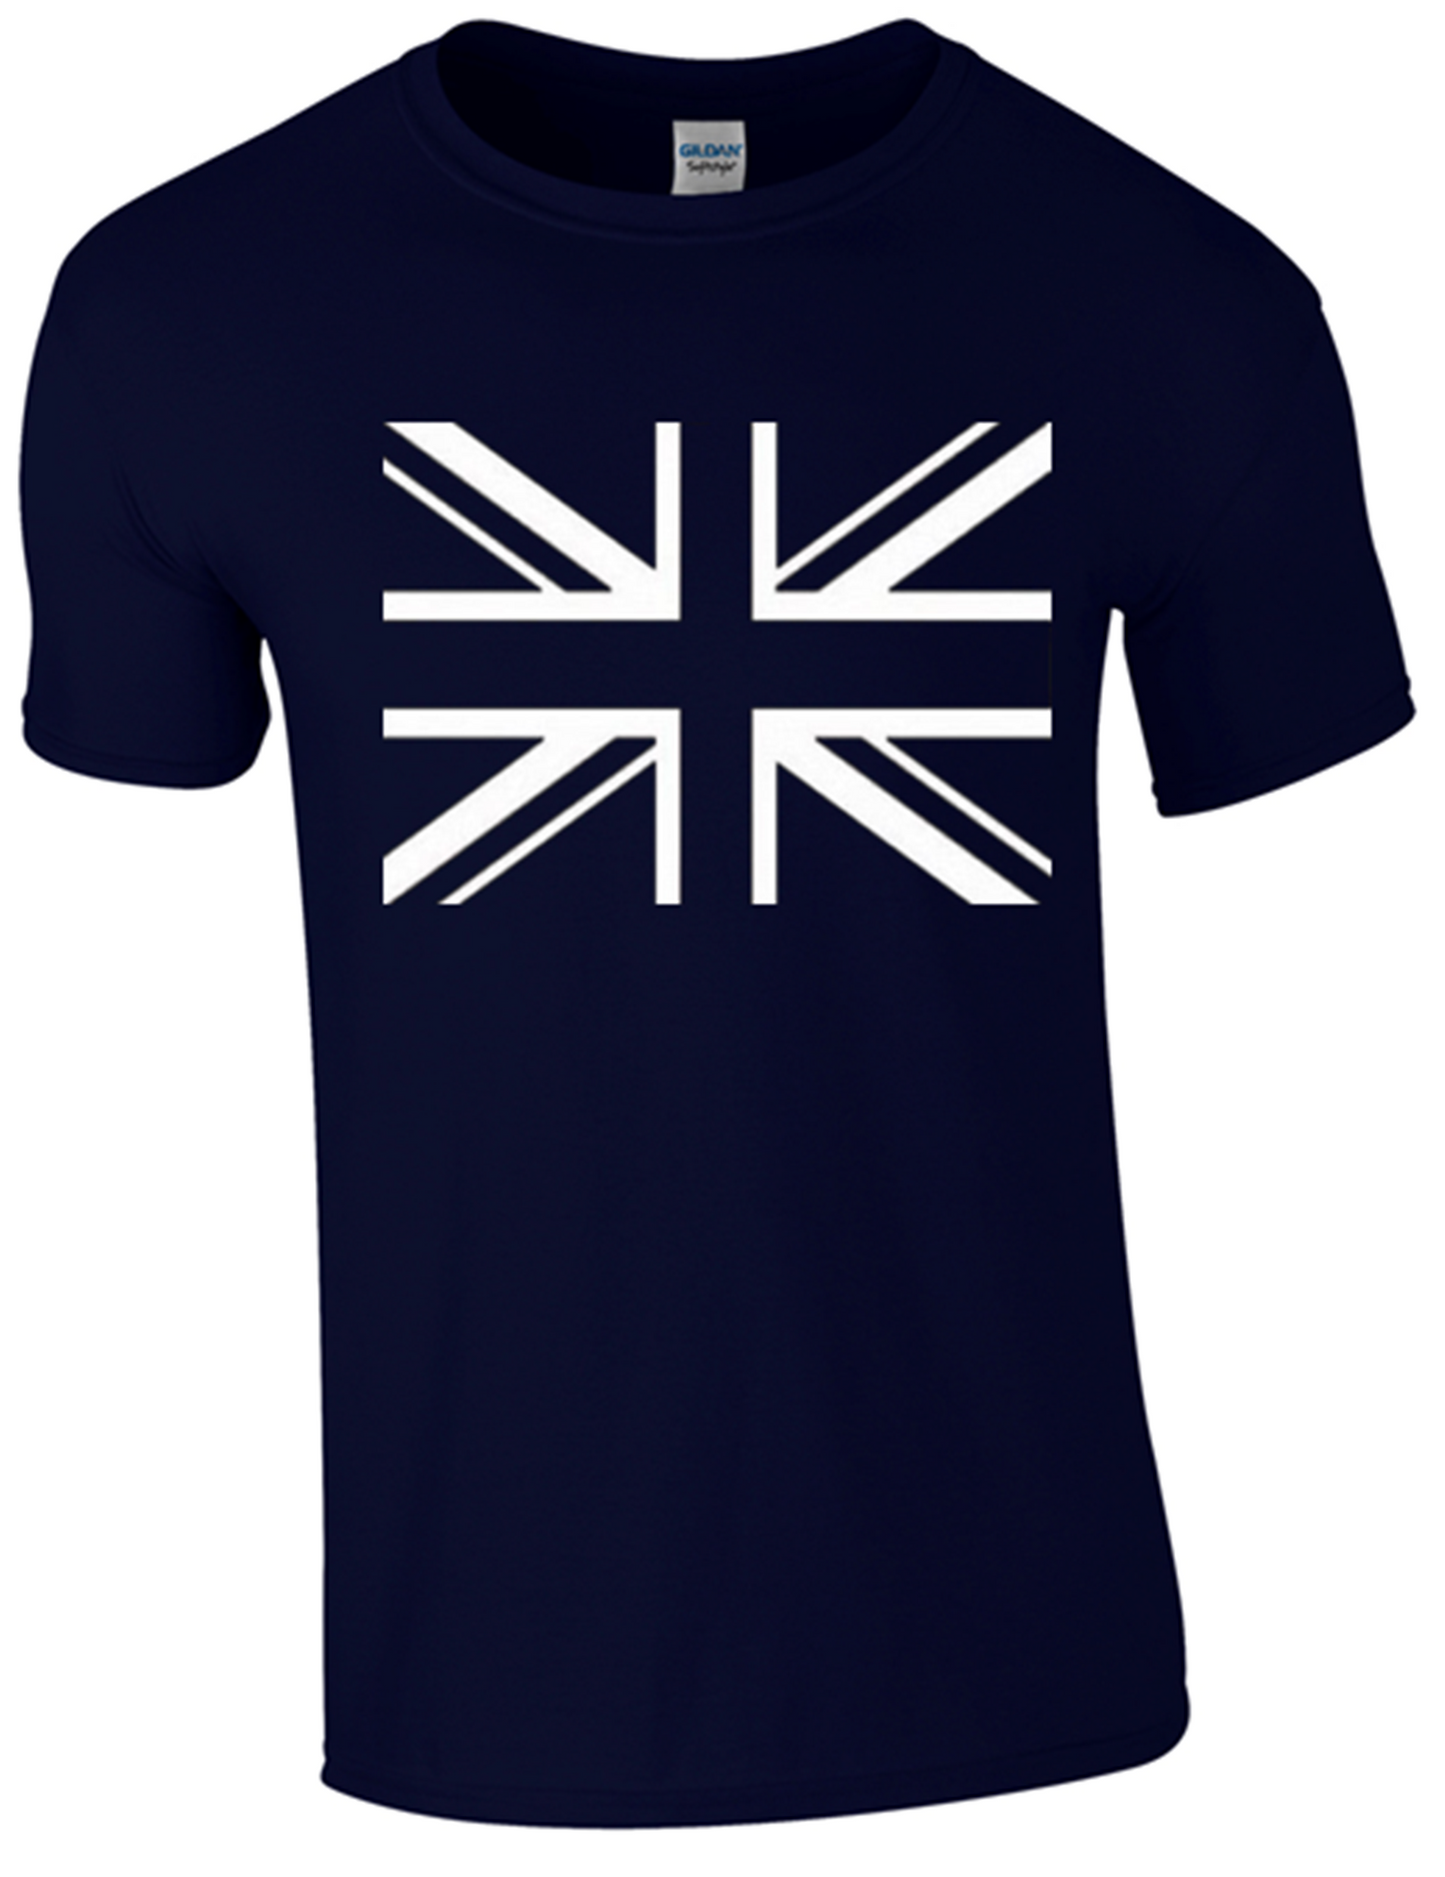 Union Jack T-Shirt Printed - Army 1157 kit S / Navy Blue Army 1157 Kit Veterans Owned Business